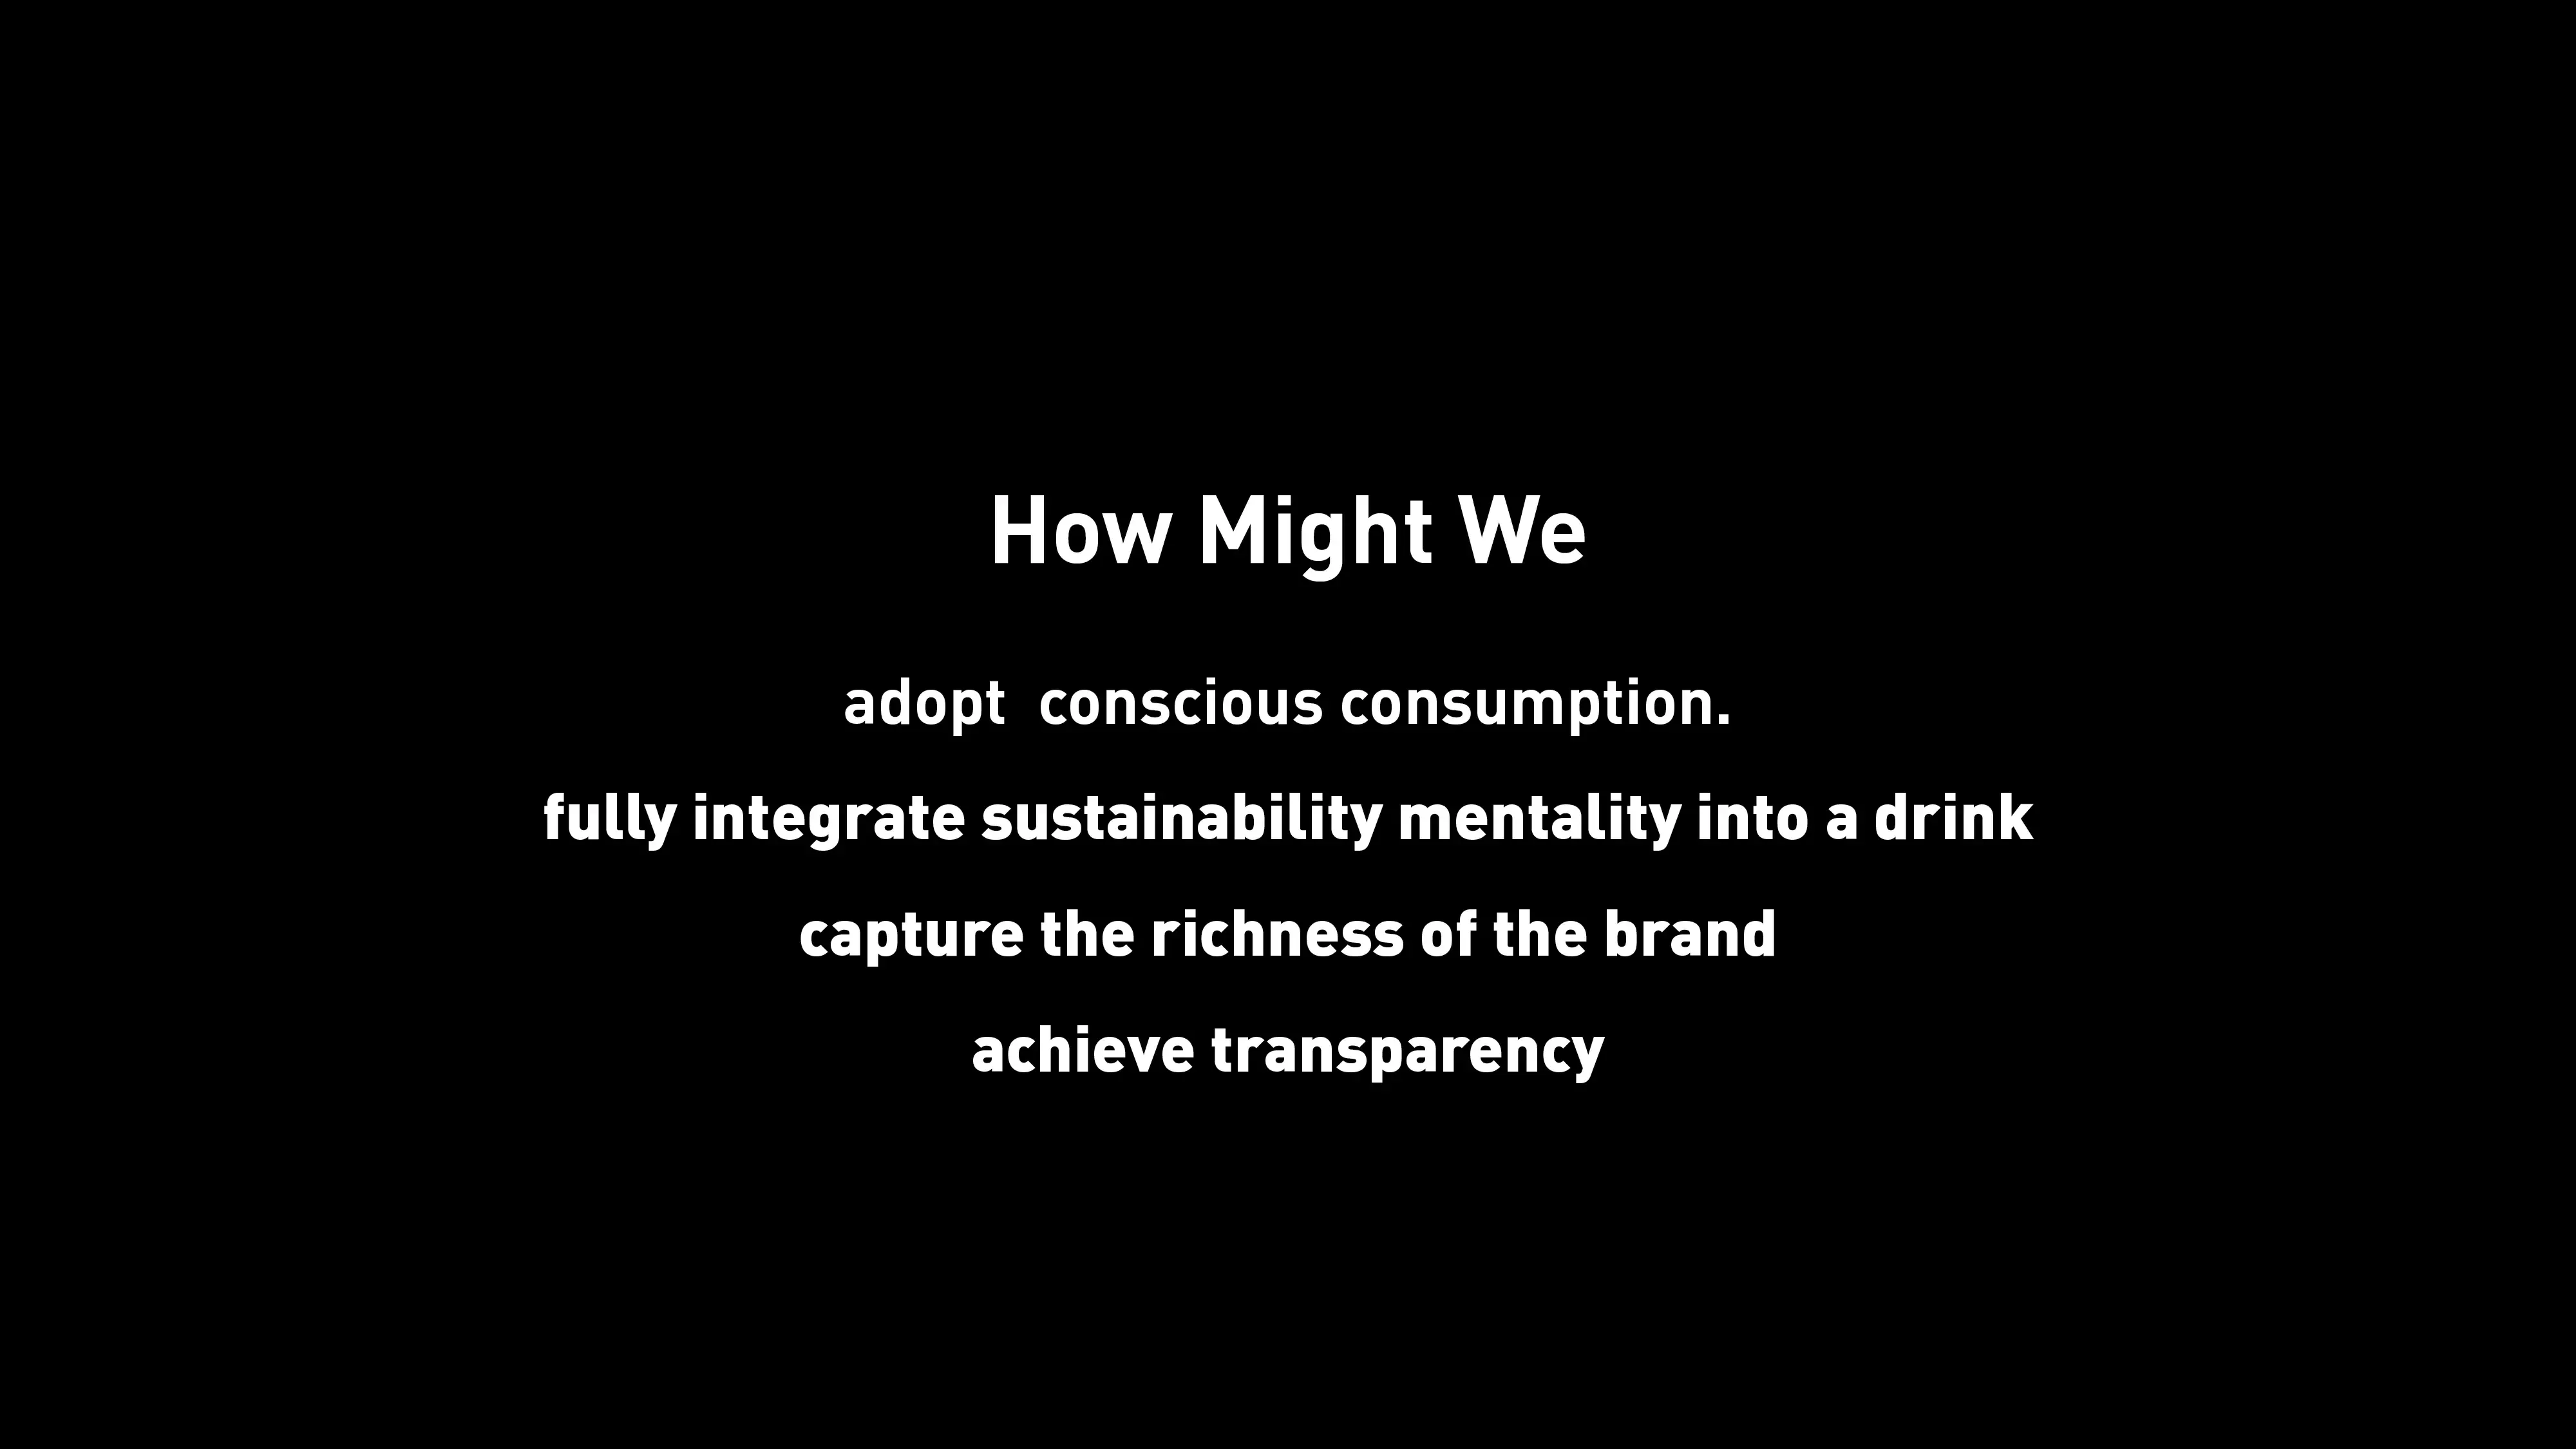 A list of our how might we's - adopt conscious consumption, fully integrate sustainability mentality into your drinking, capture richness of the brand and to achieve transparency.